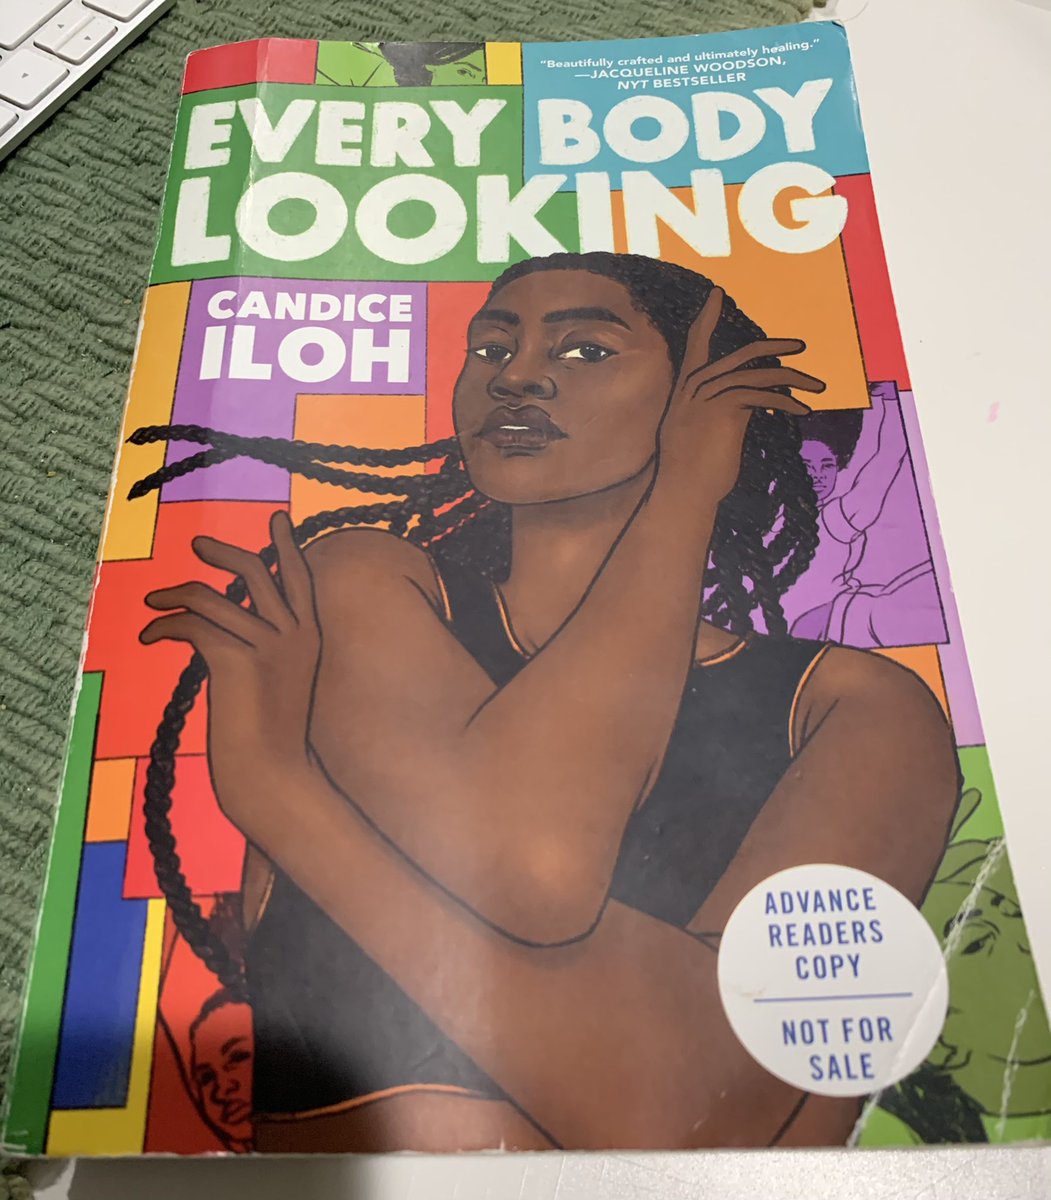 This afternoon’s #bookmail 📚📫... can’t wait to read Ada’s story! Thank you @BecomHer @DuttonBooks @PenguinTeen for sharing #EverybodyLooking with #BookPosse